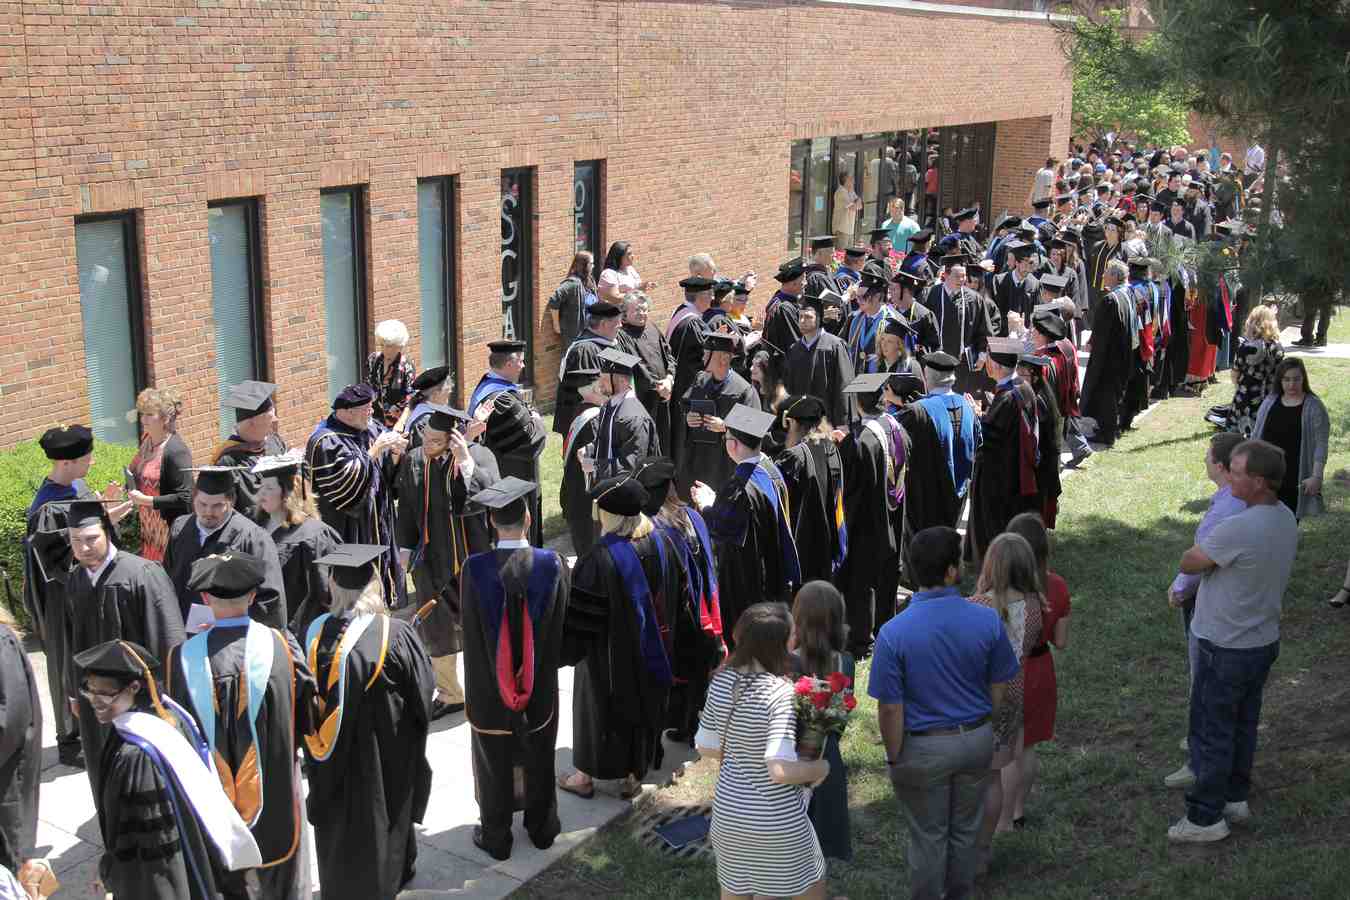 LWC to Hold 114th Commencement Ceremony on Saturday, Guests Must Have a Ticket to Attend